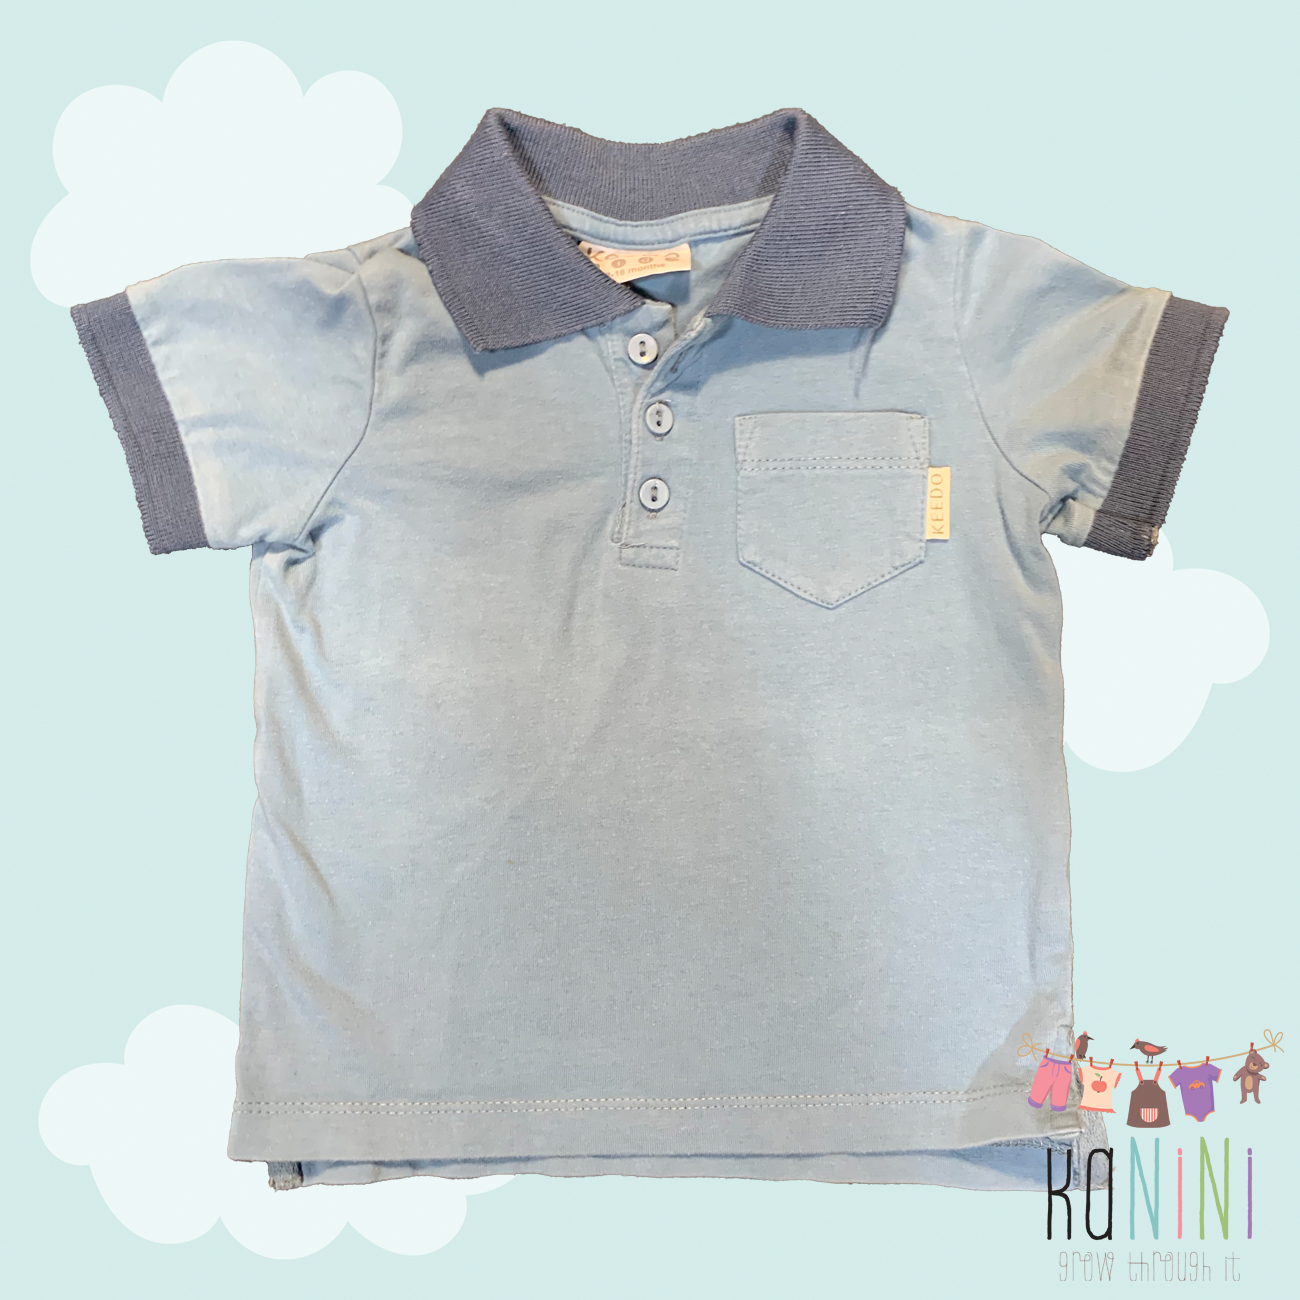 Featured image for “Keedo 12-18 Months Boys t-Shirt”